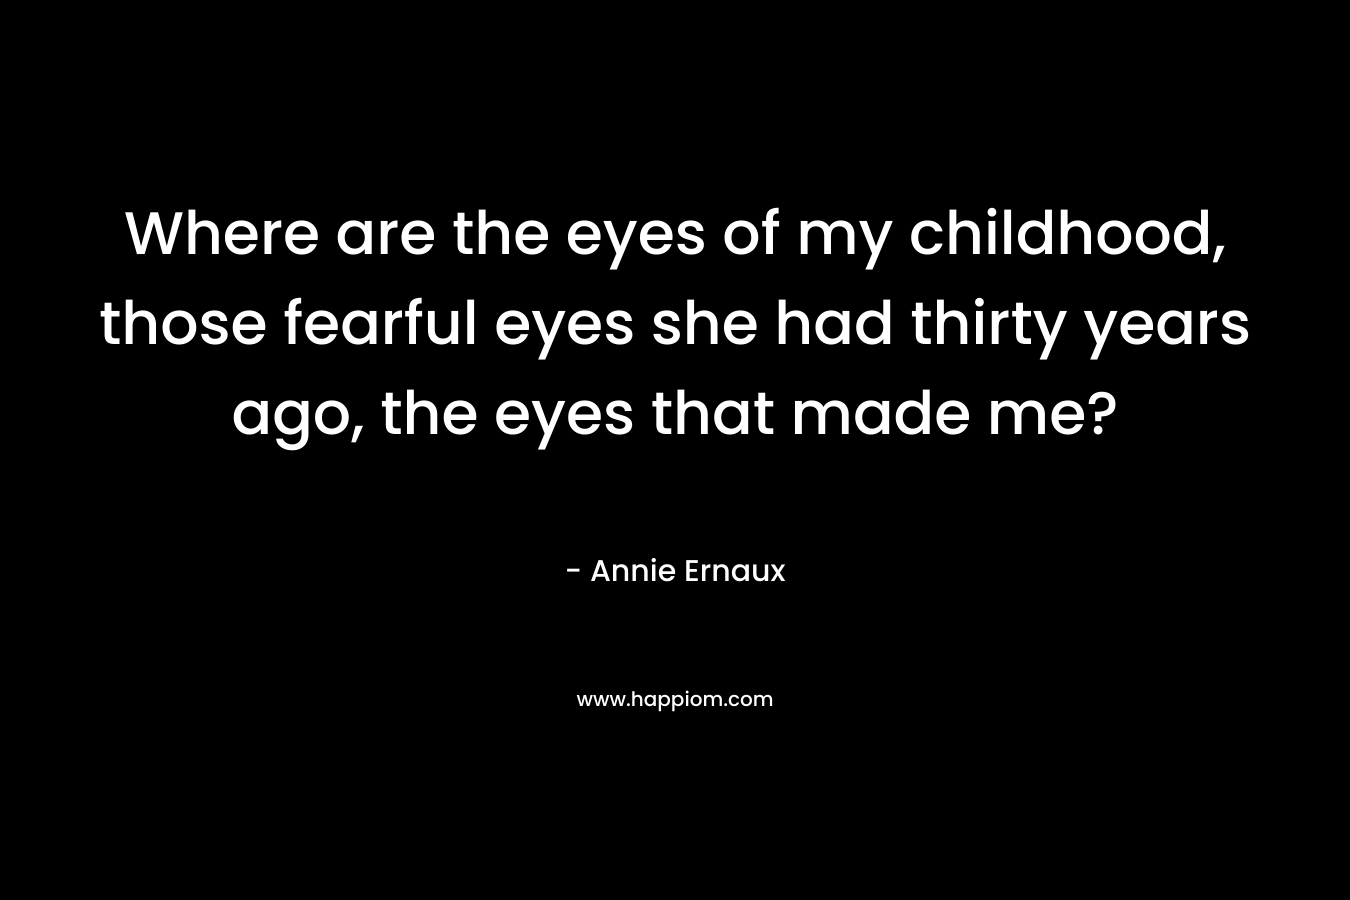 Where are the eyes of my childhood, those fearful eyes she had thirty years ago, the eyes that made me? – Annie Ernaux